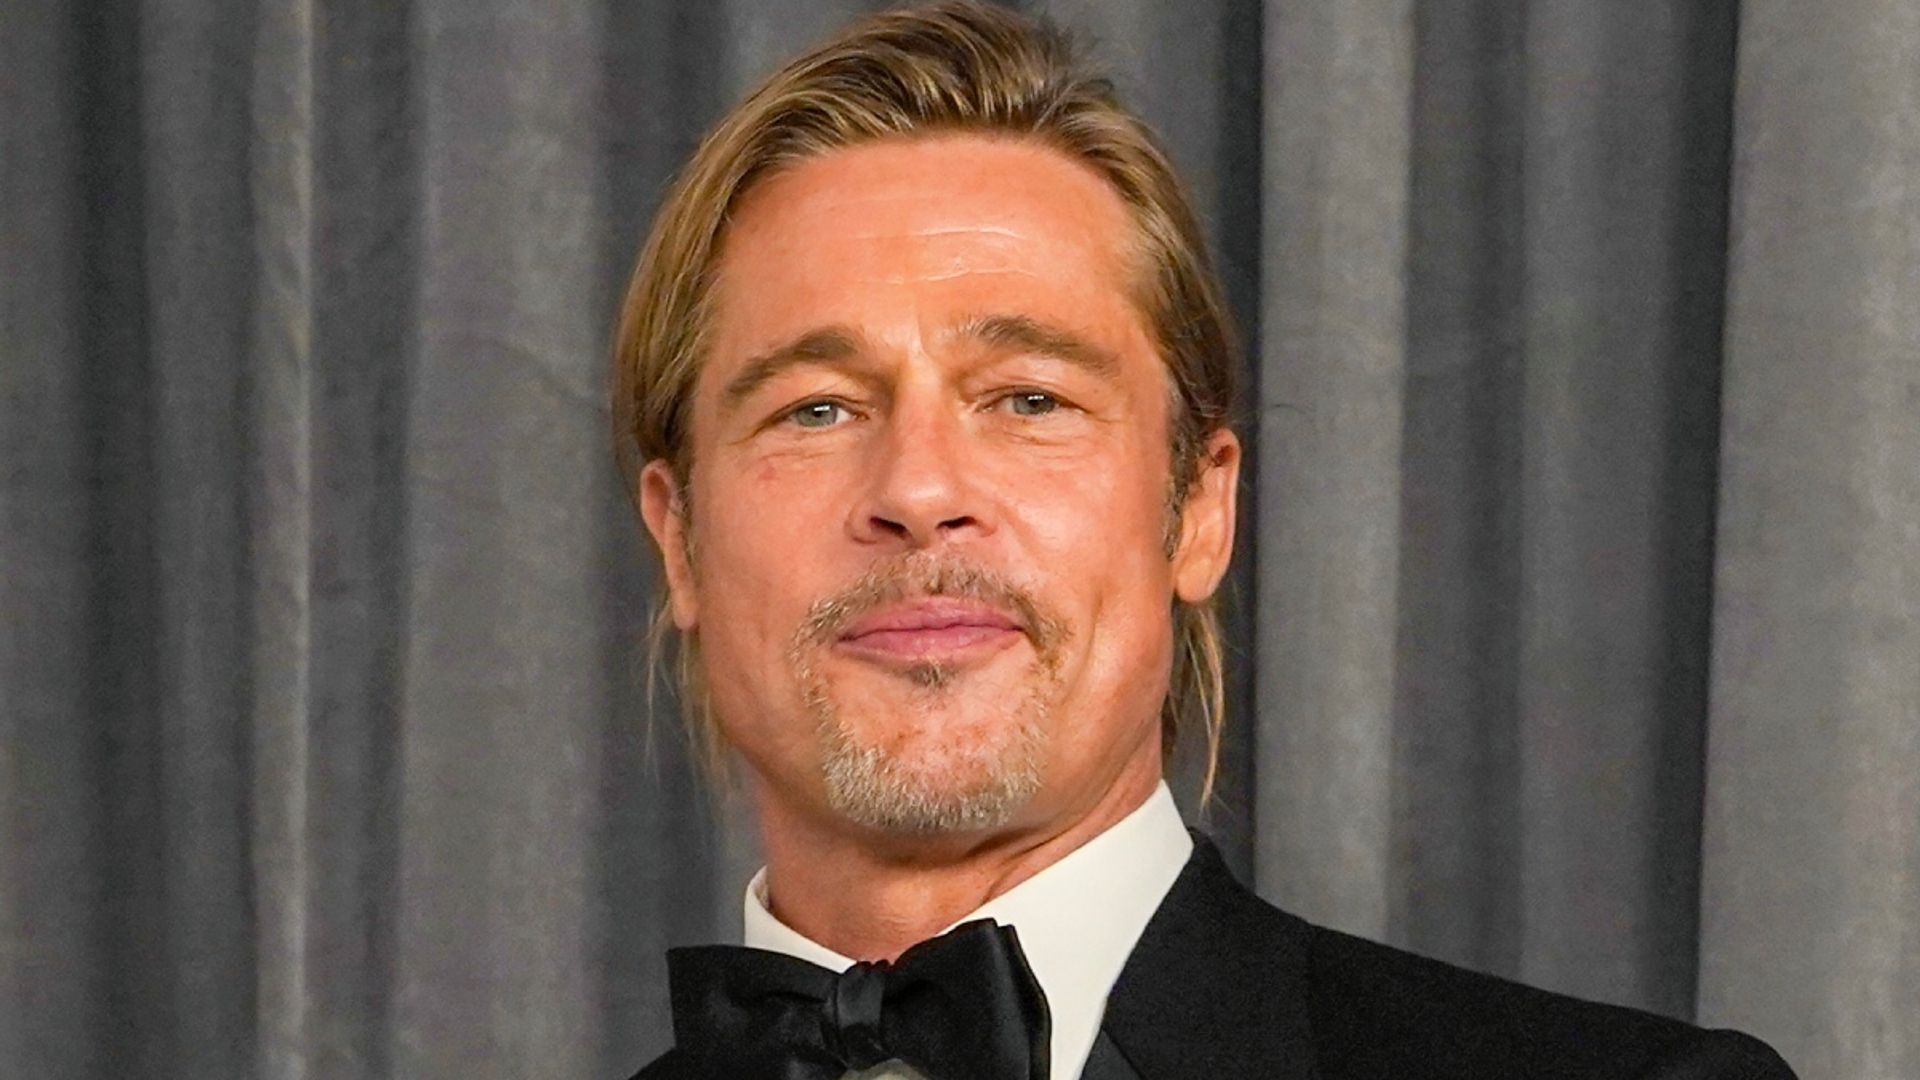 Brad Pitt looks otherworldly as he opens up about his health